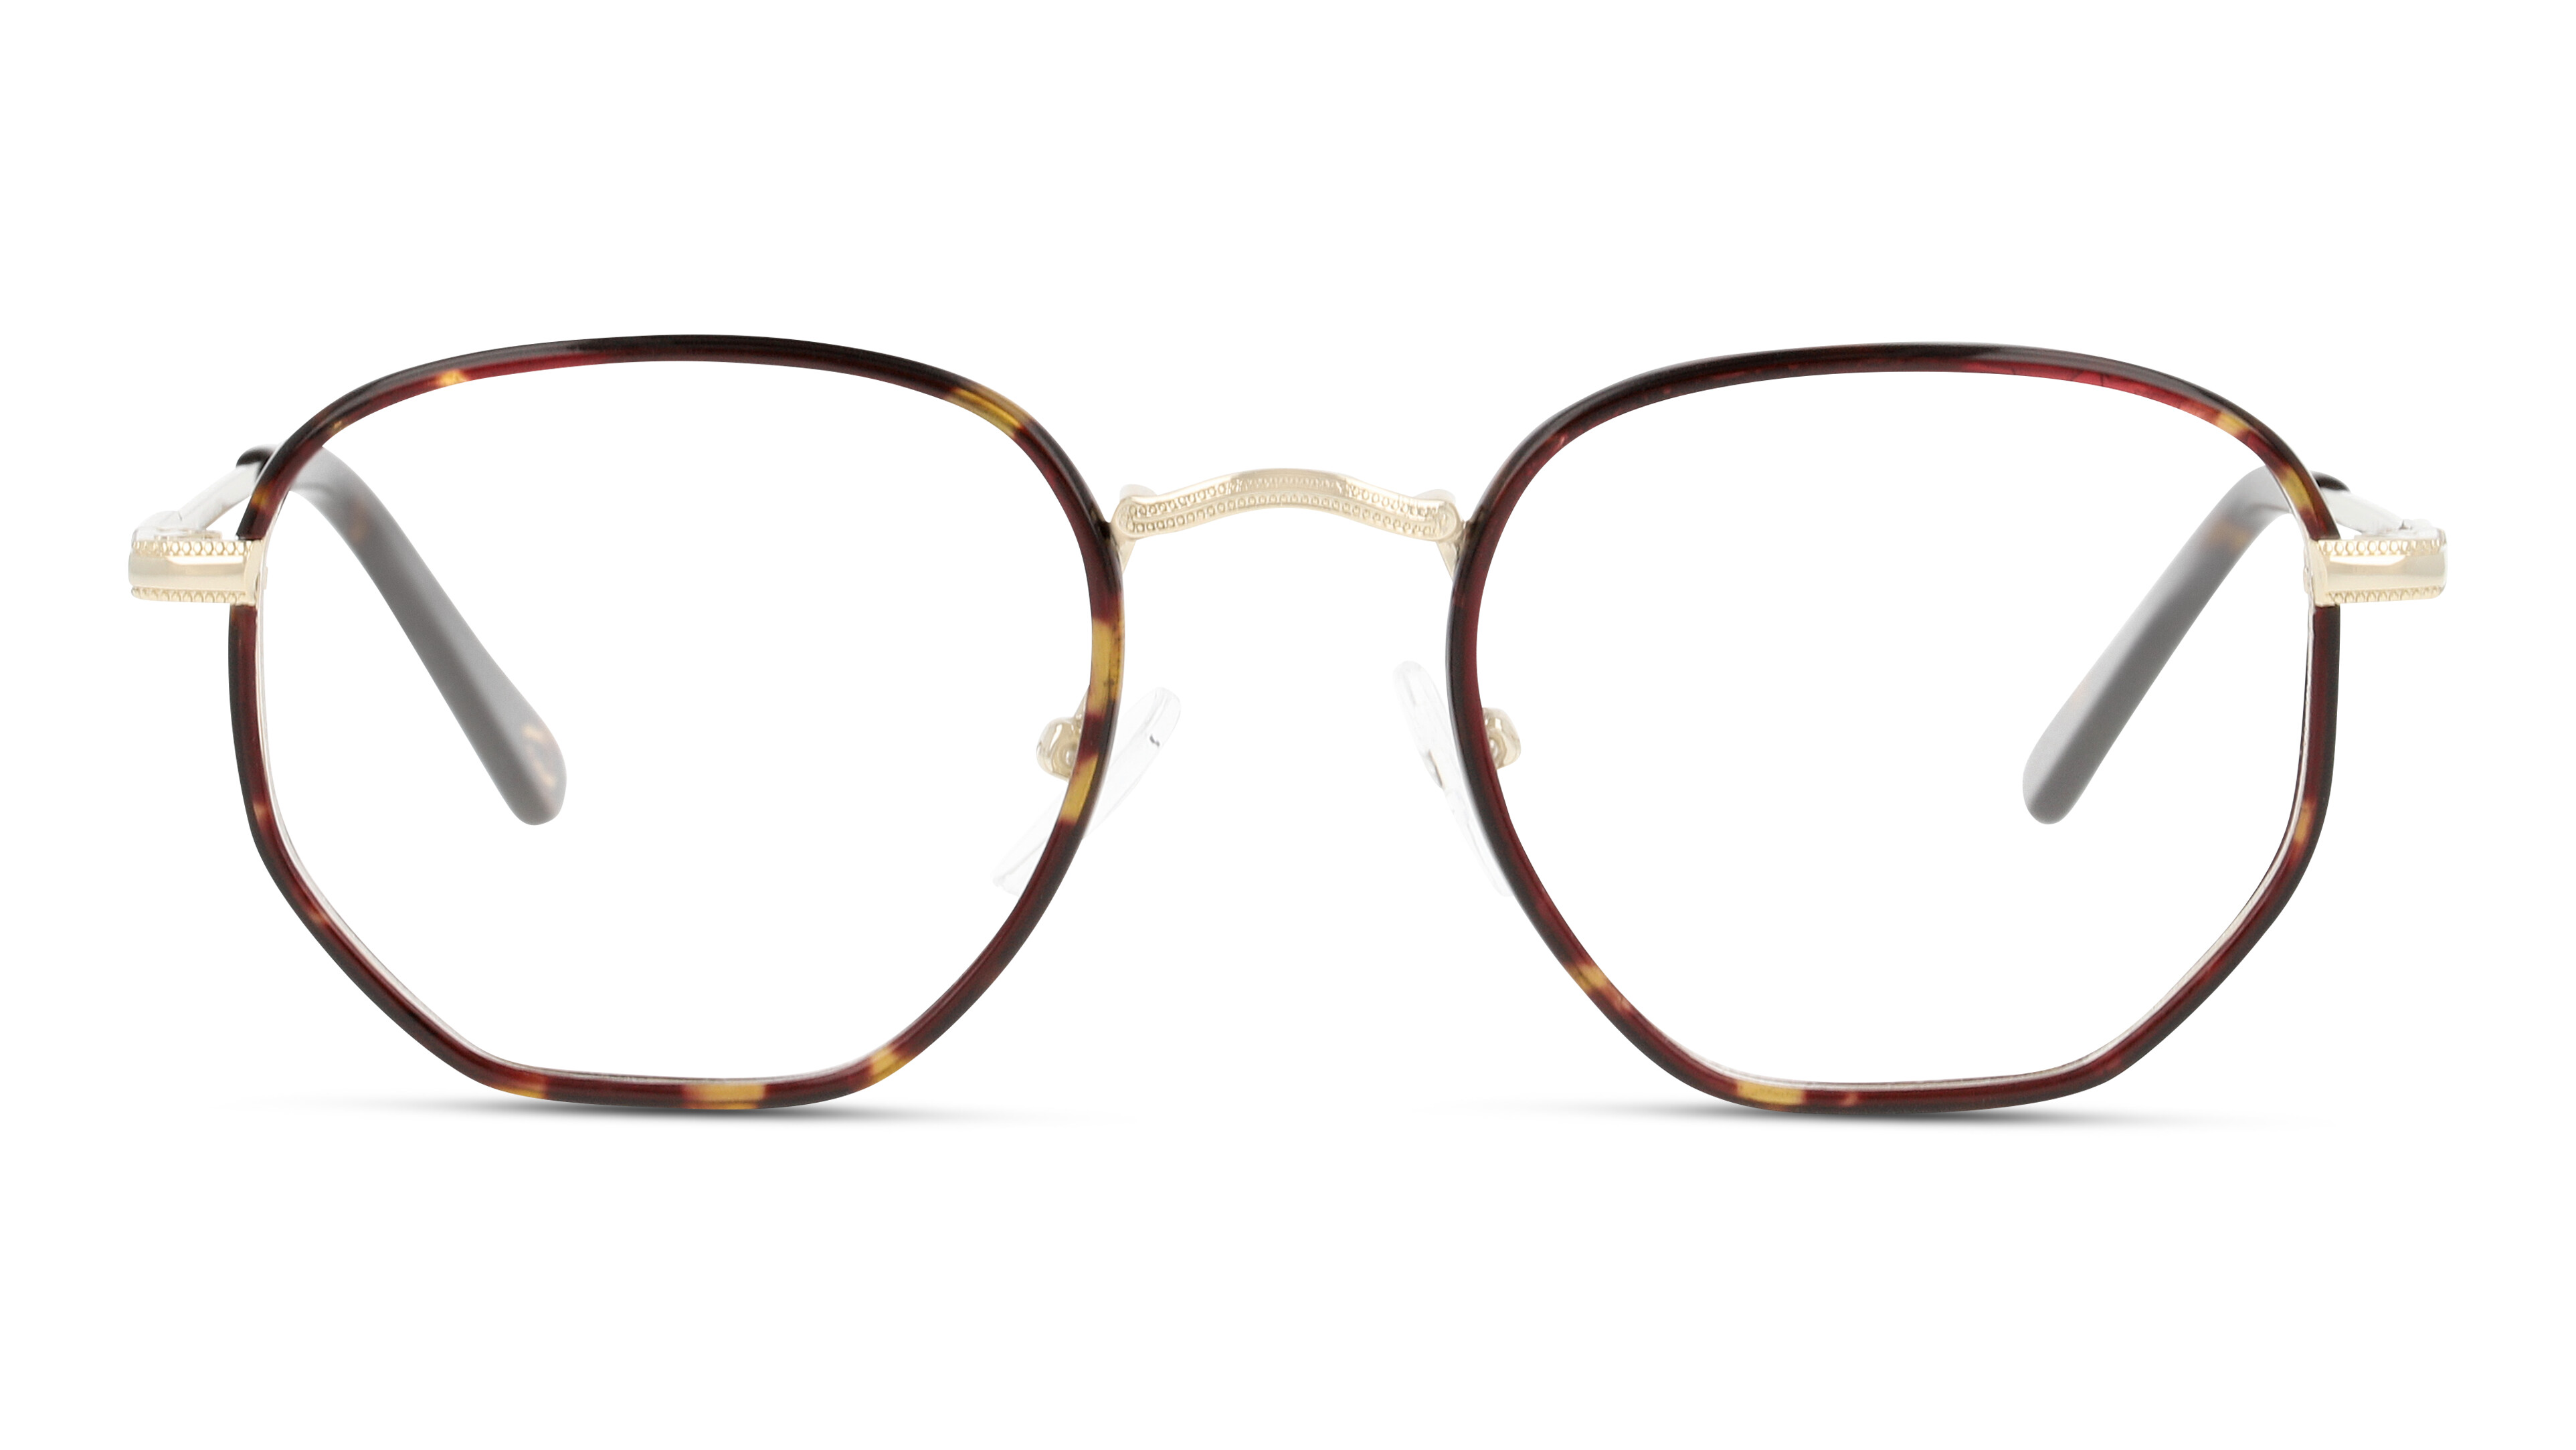 UNOFFICIAL UNOT0102 4470 Brille